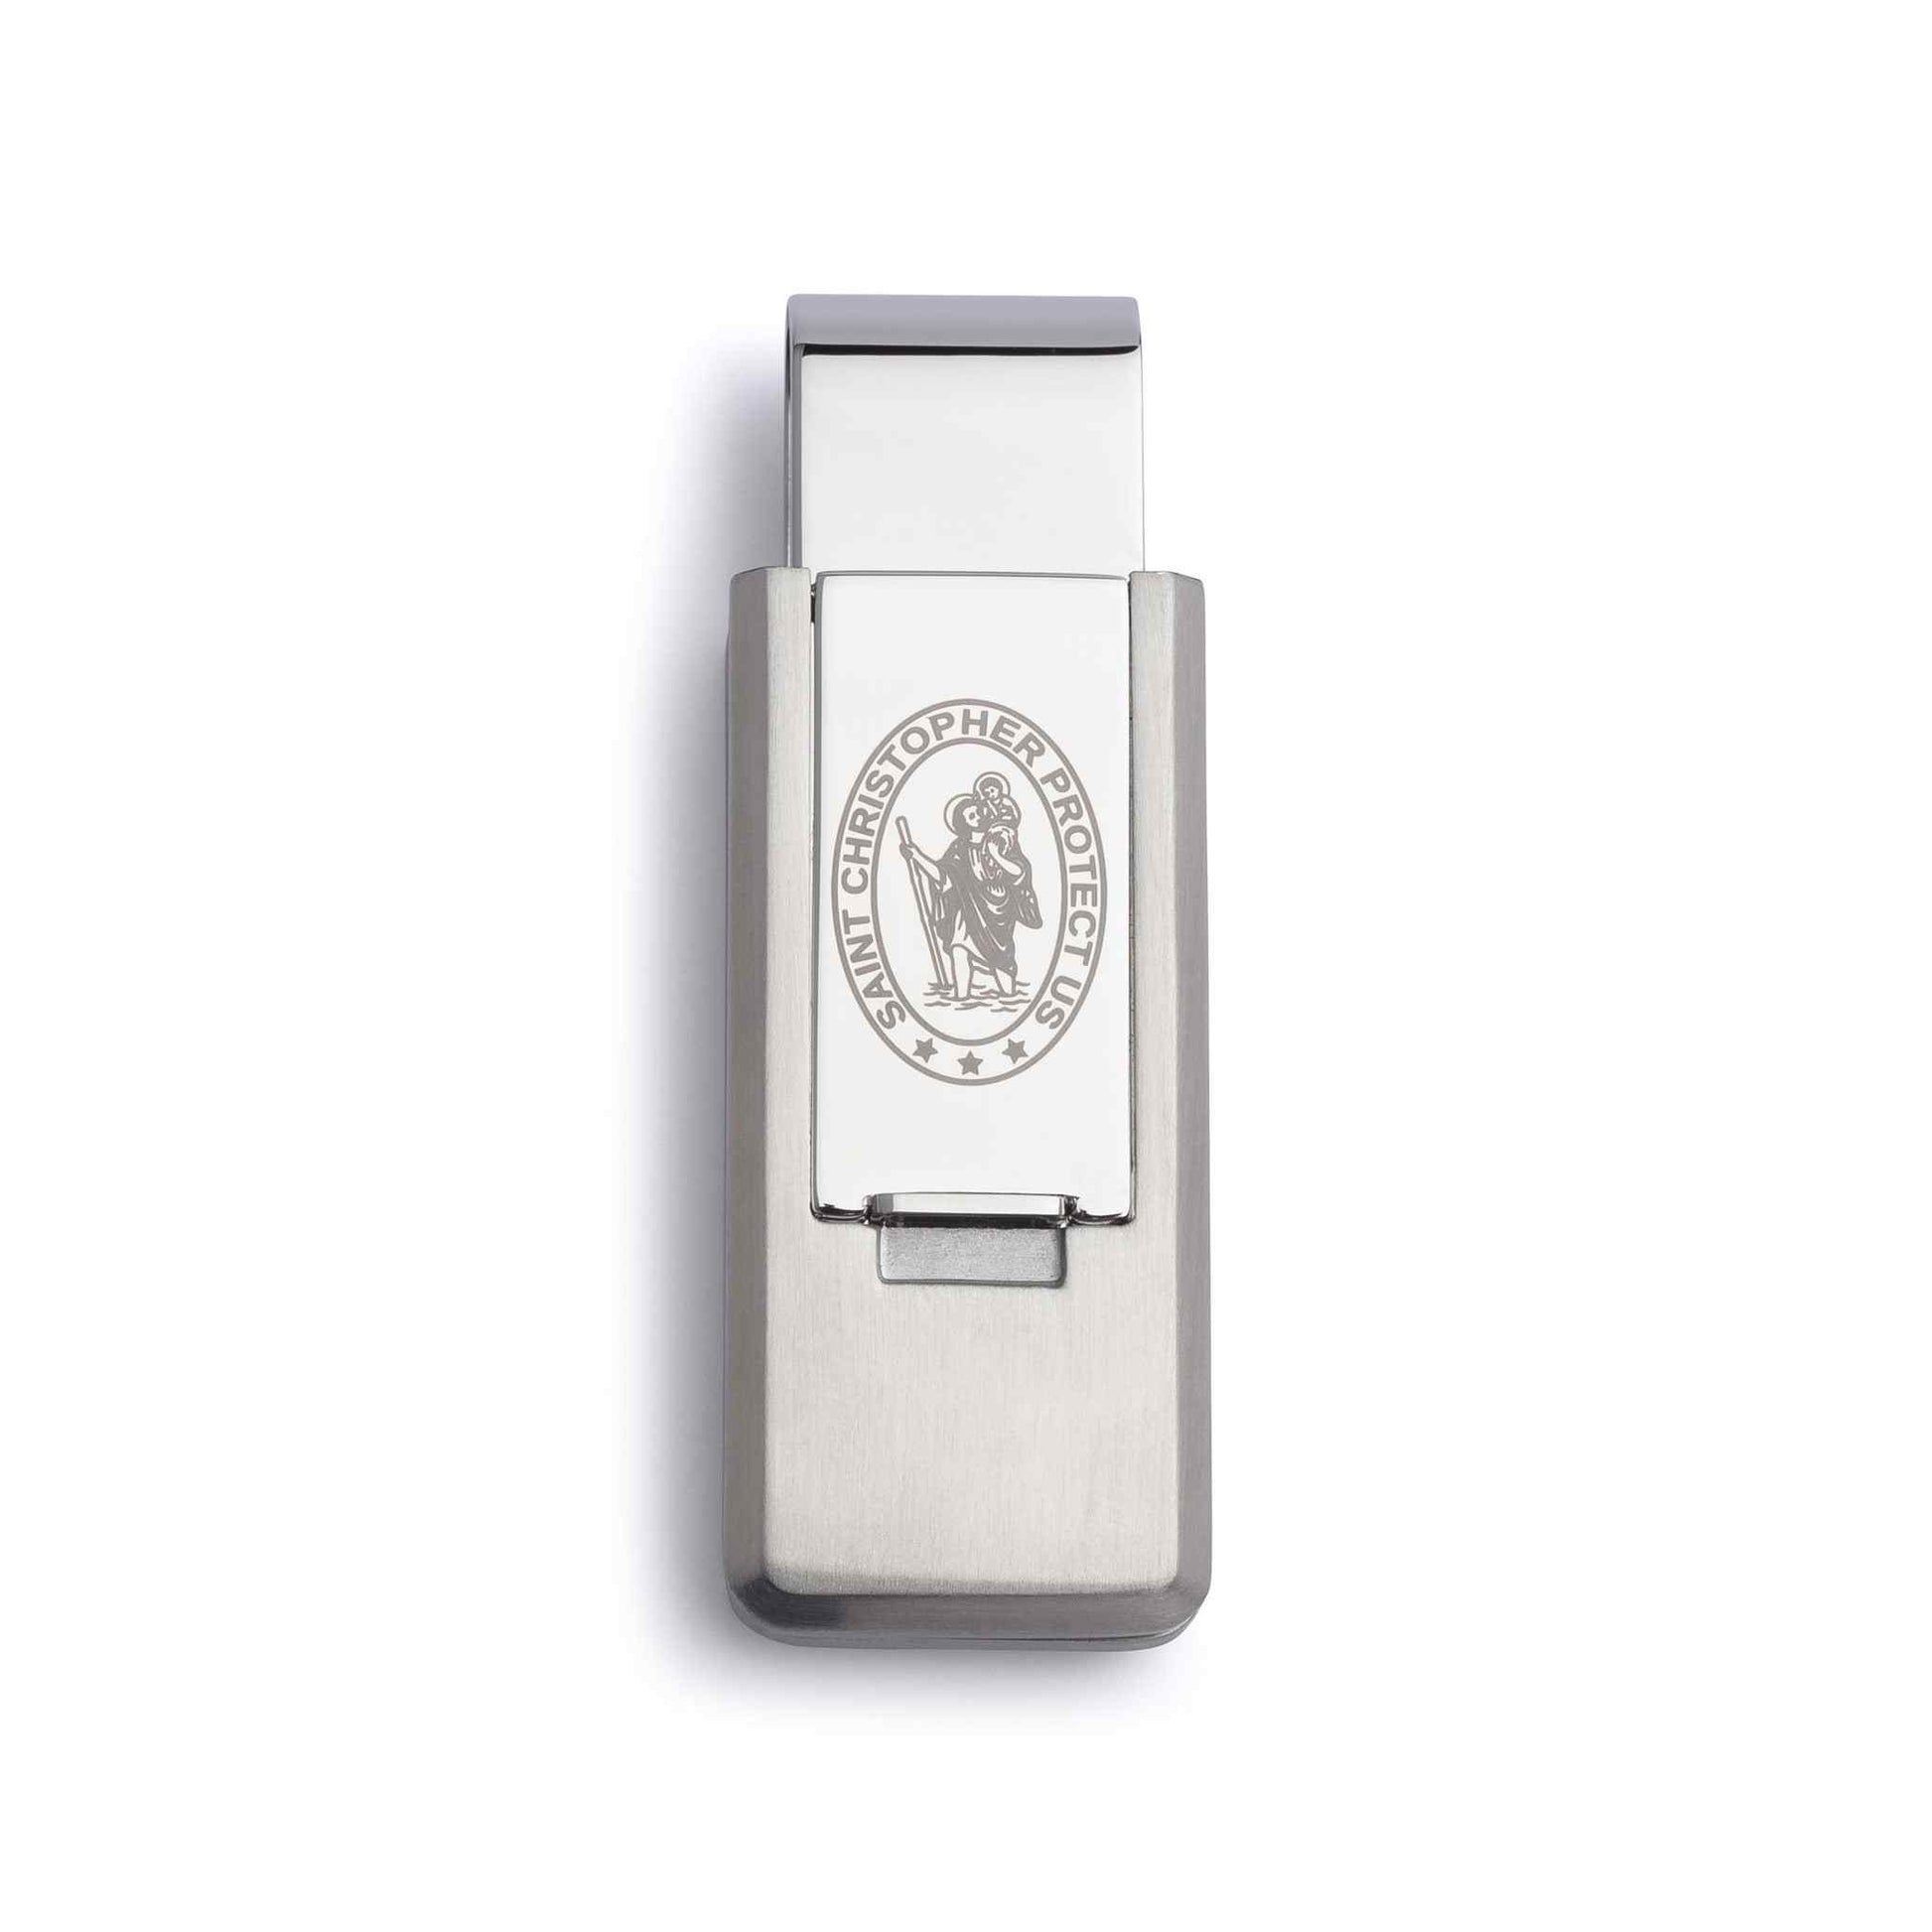 A religious symbol flip money clip displayed on a neutral white background.